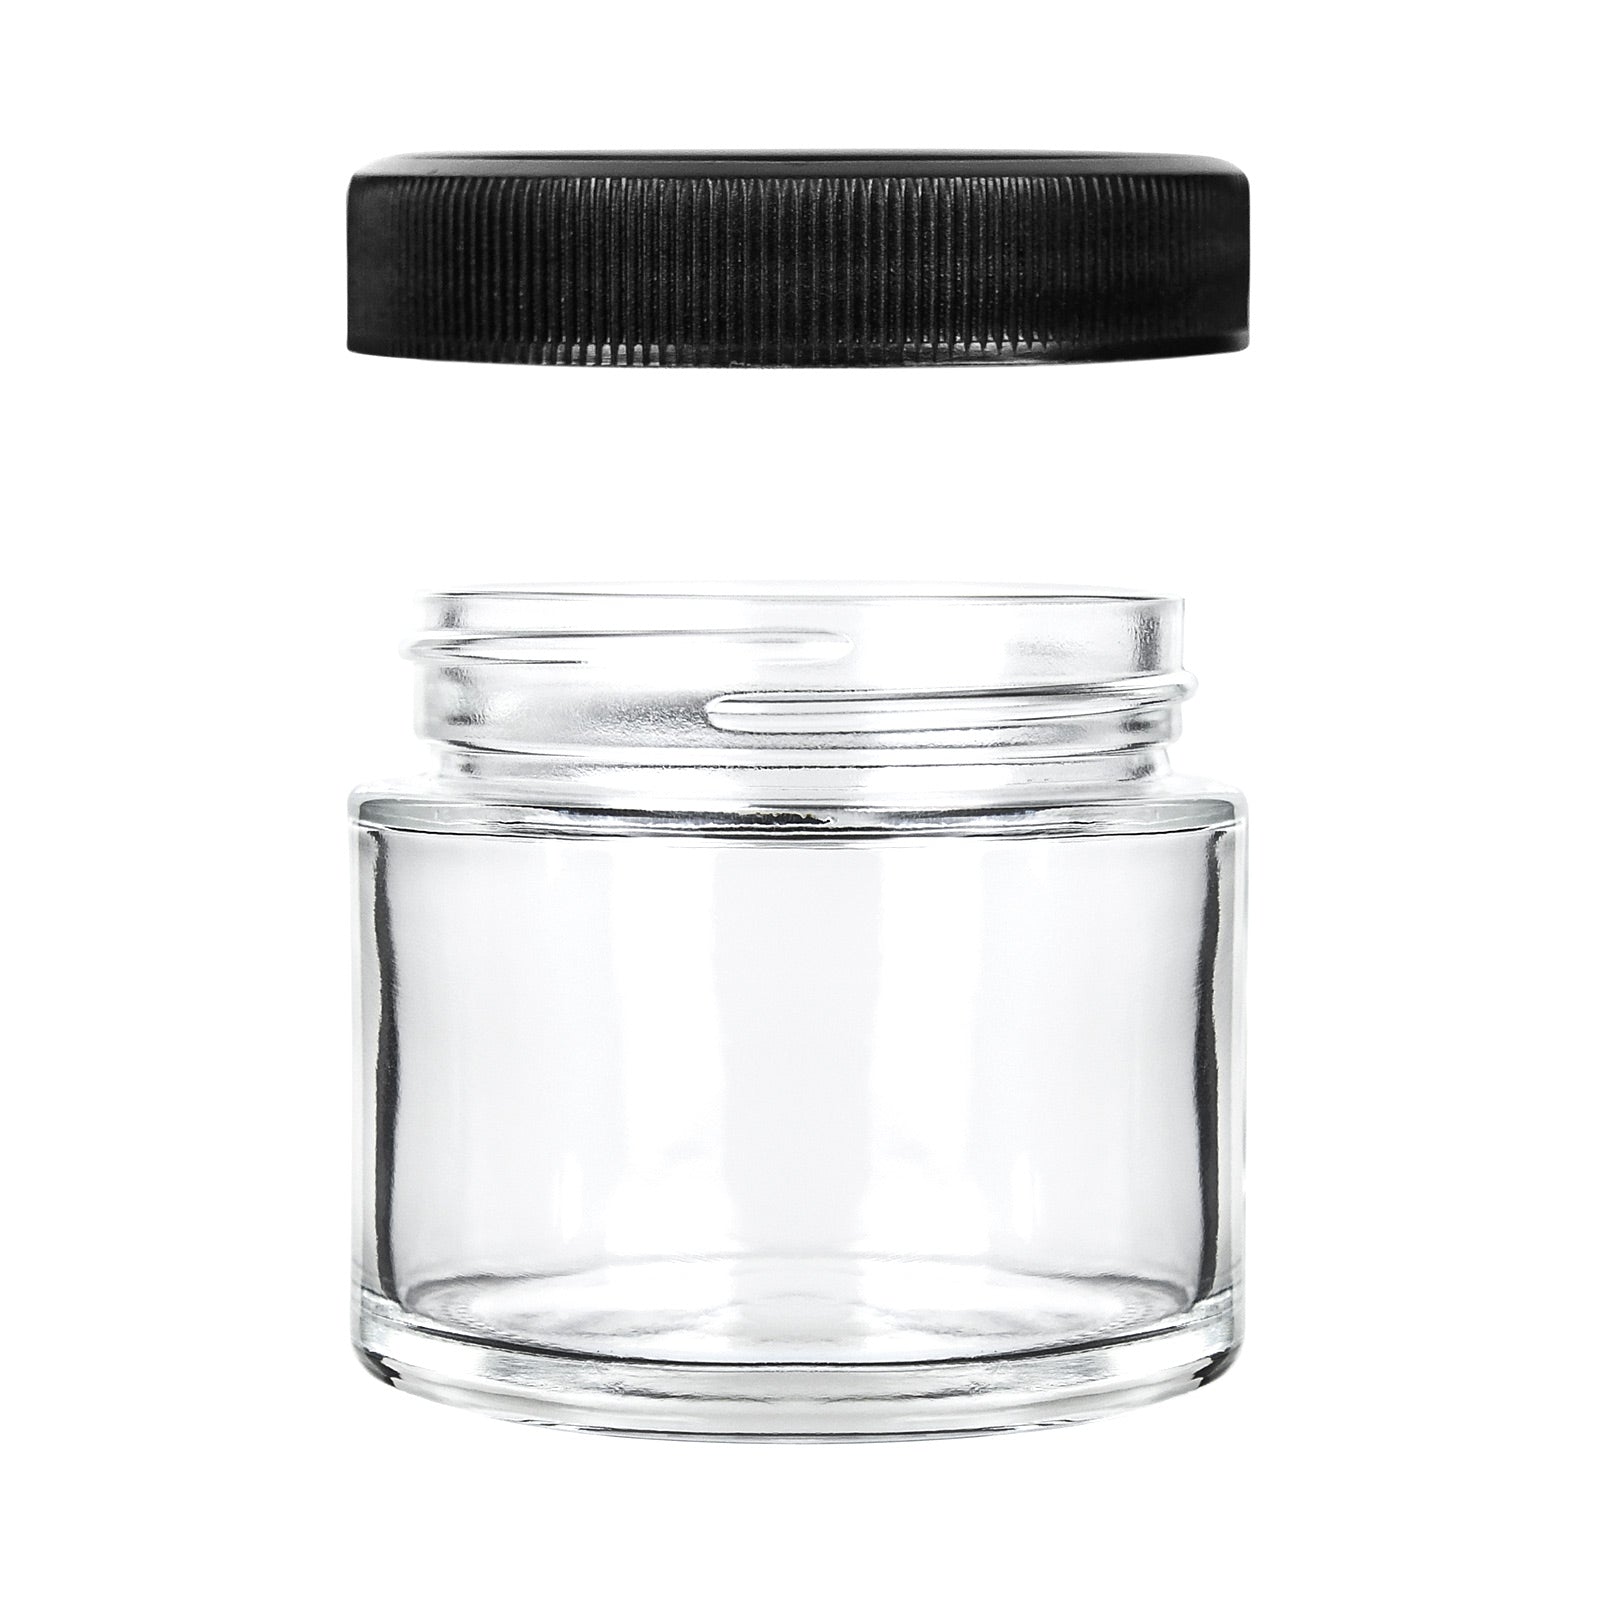 2oz Glass Jars With Black Caps - 3.5 Grams - 20 Count